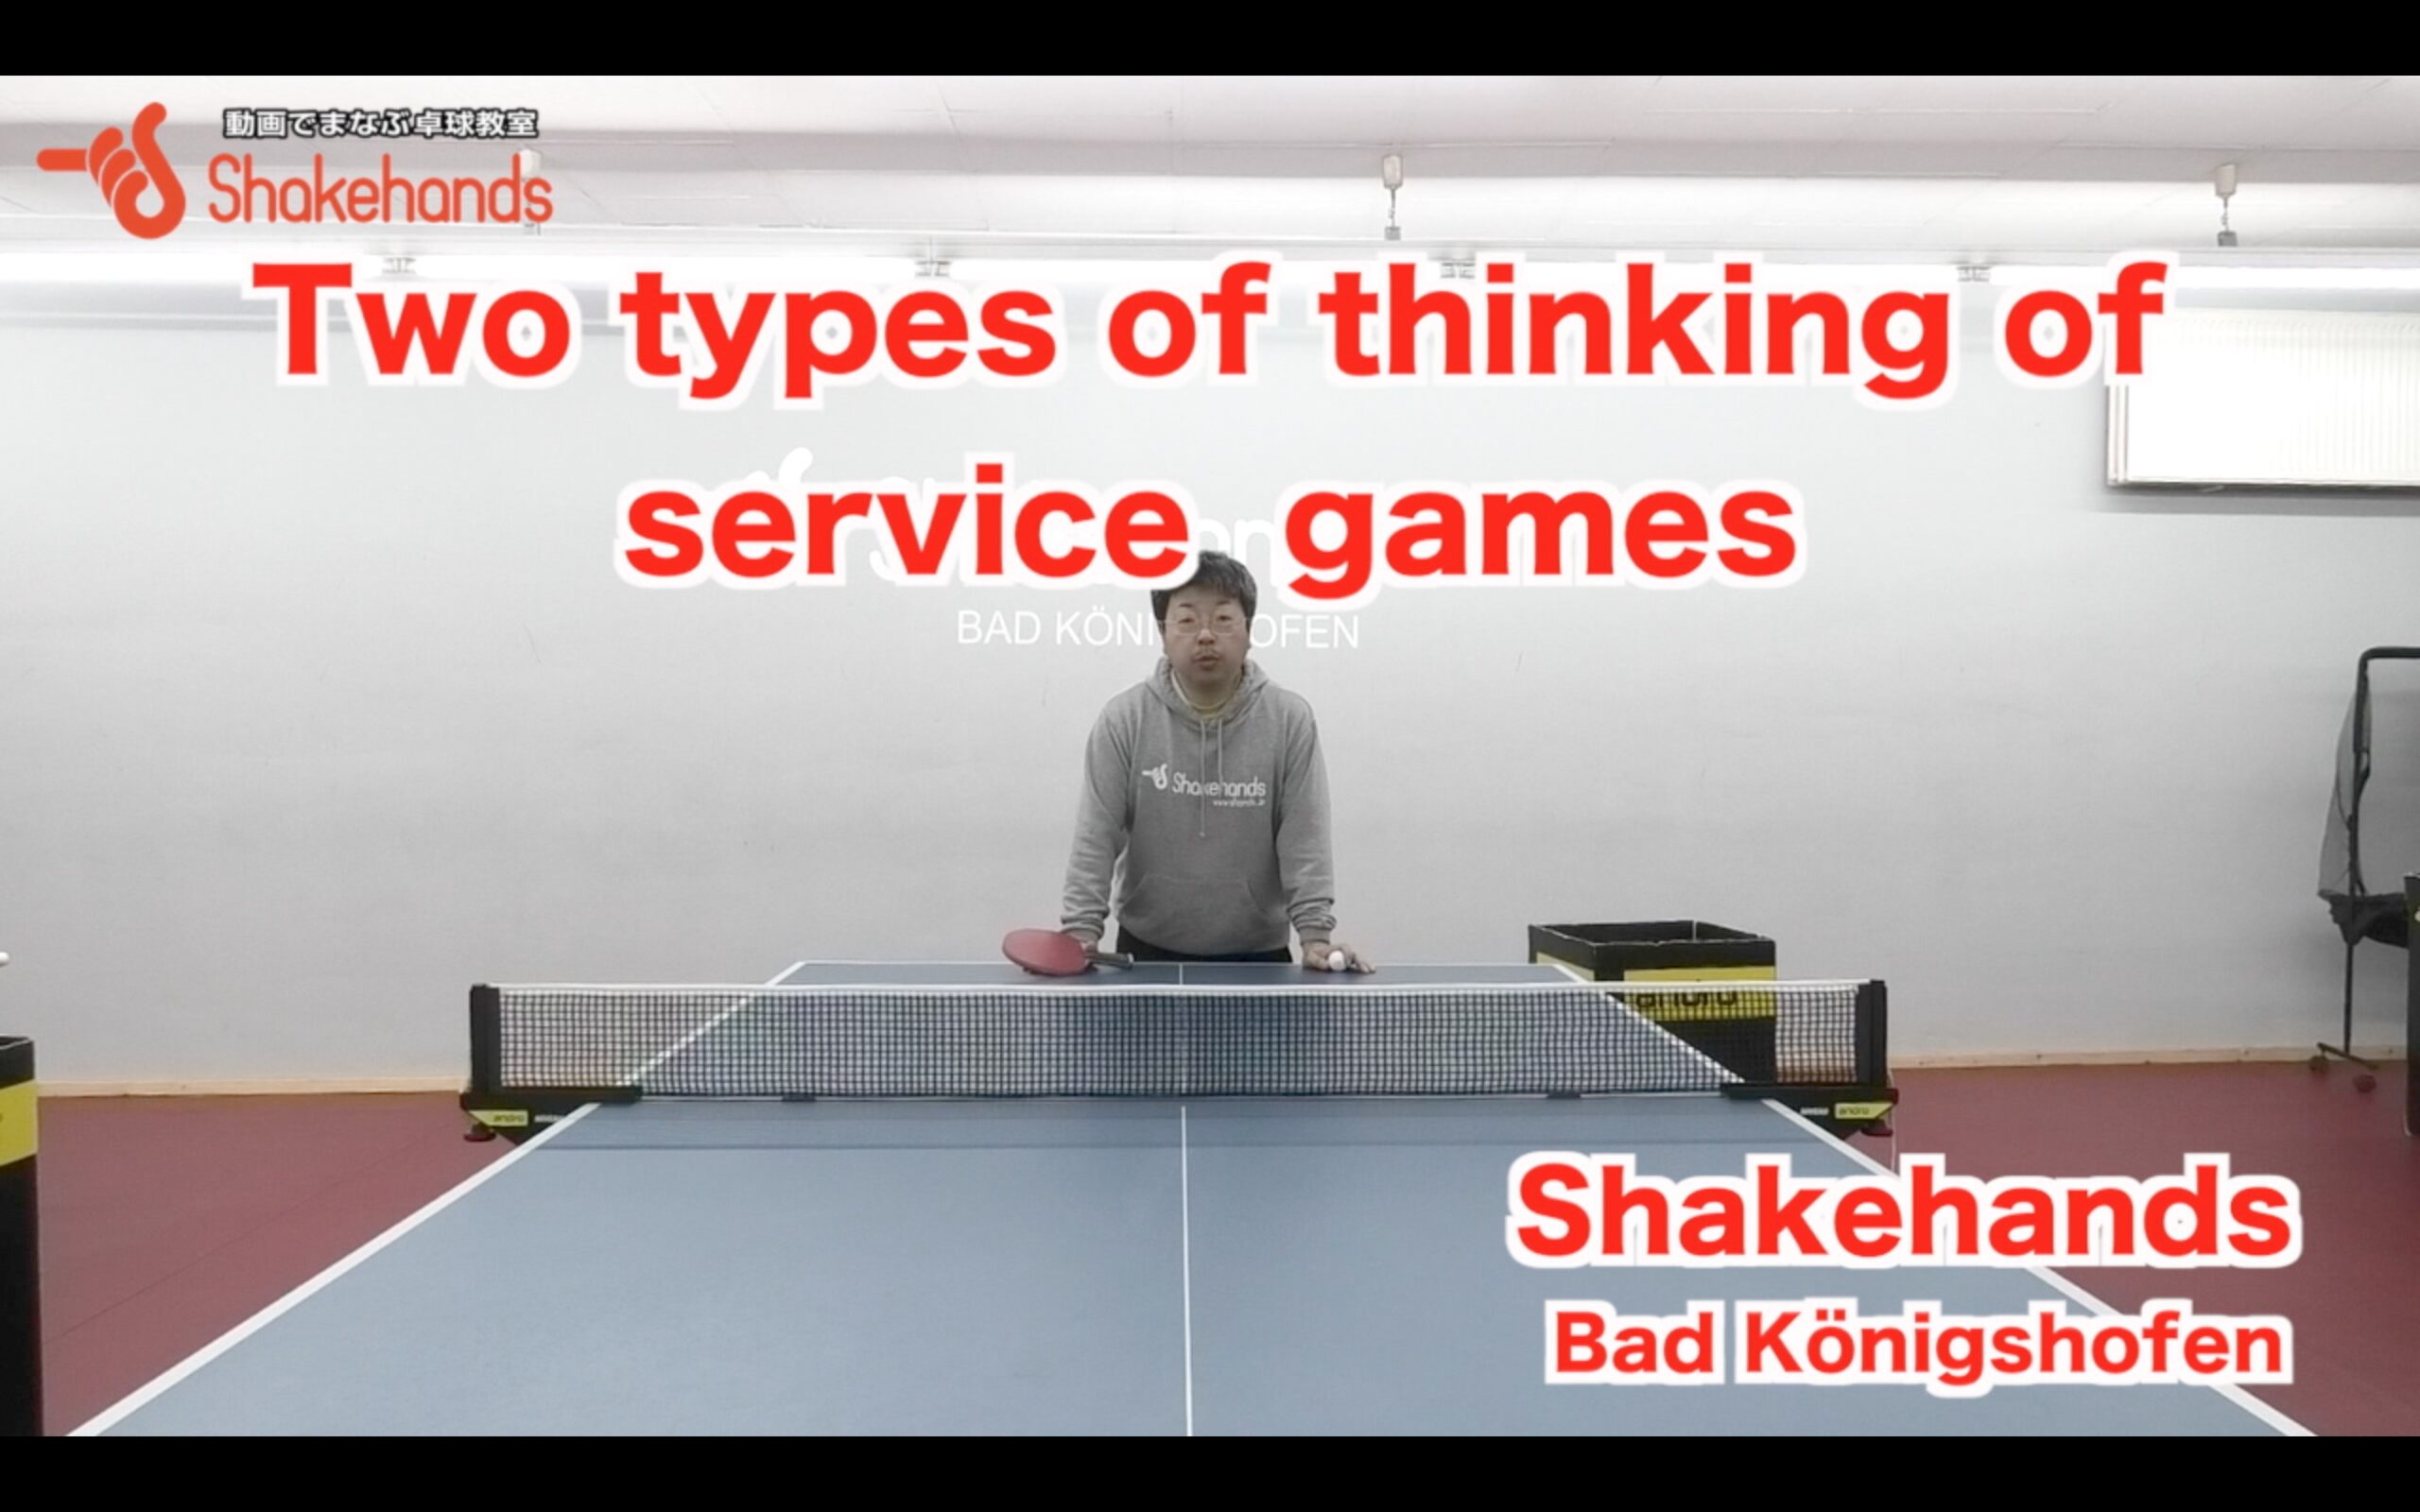 Two types of thinking of service games